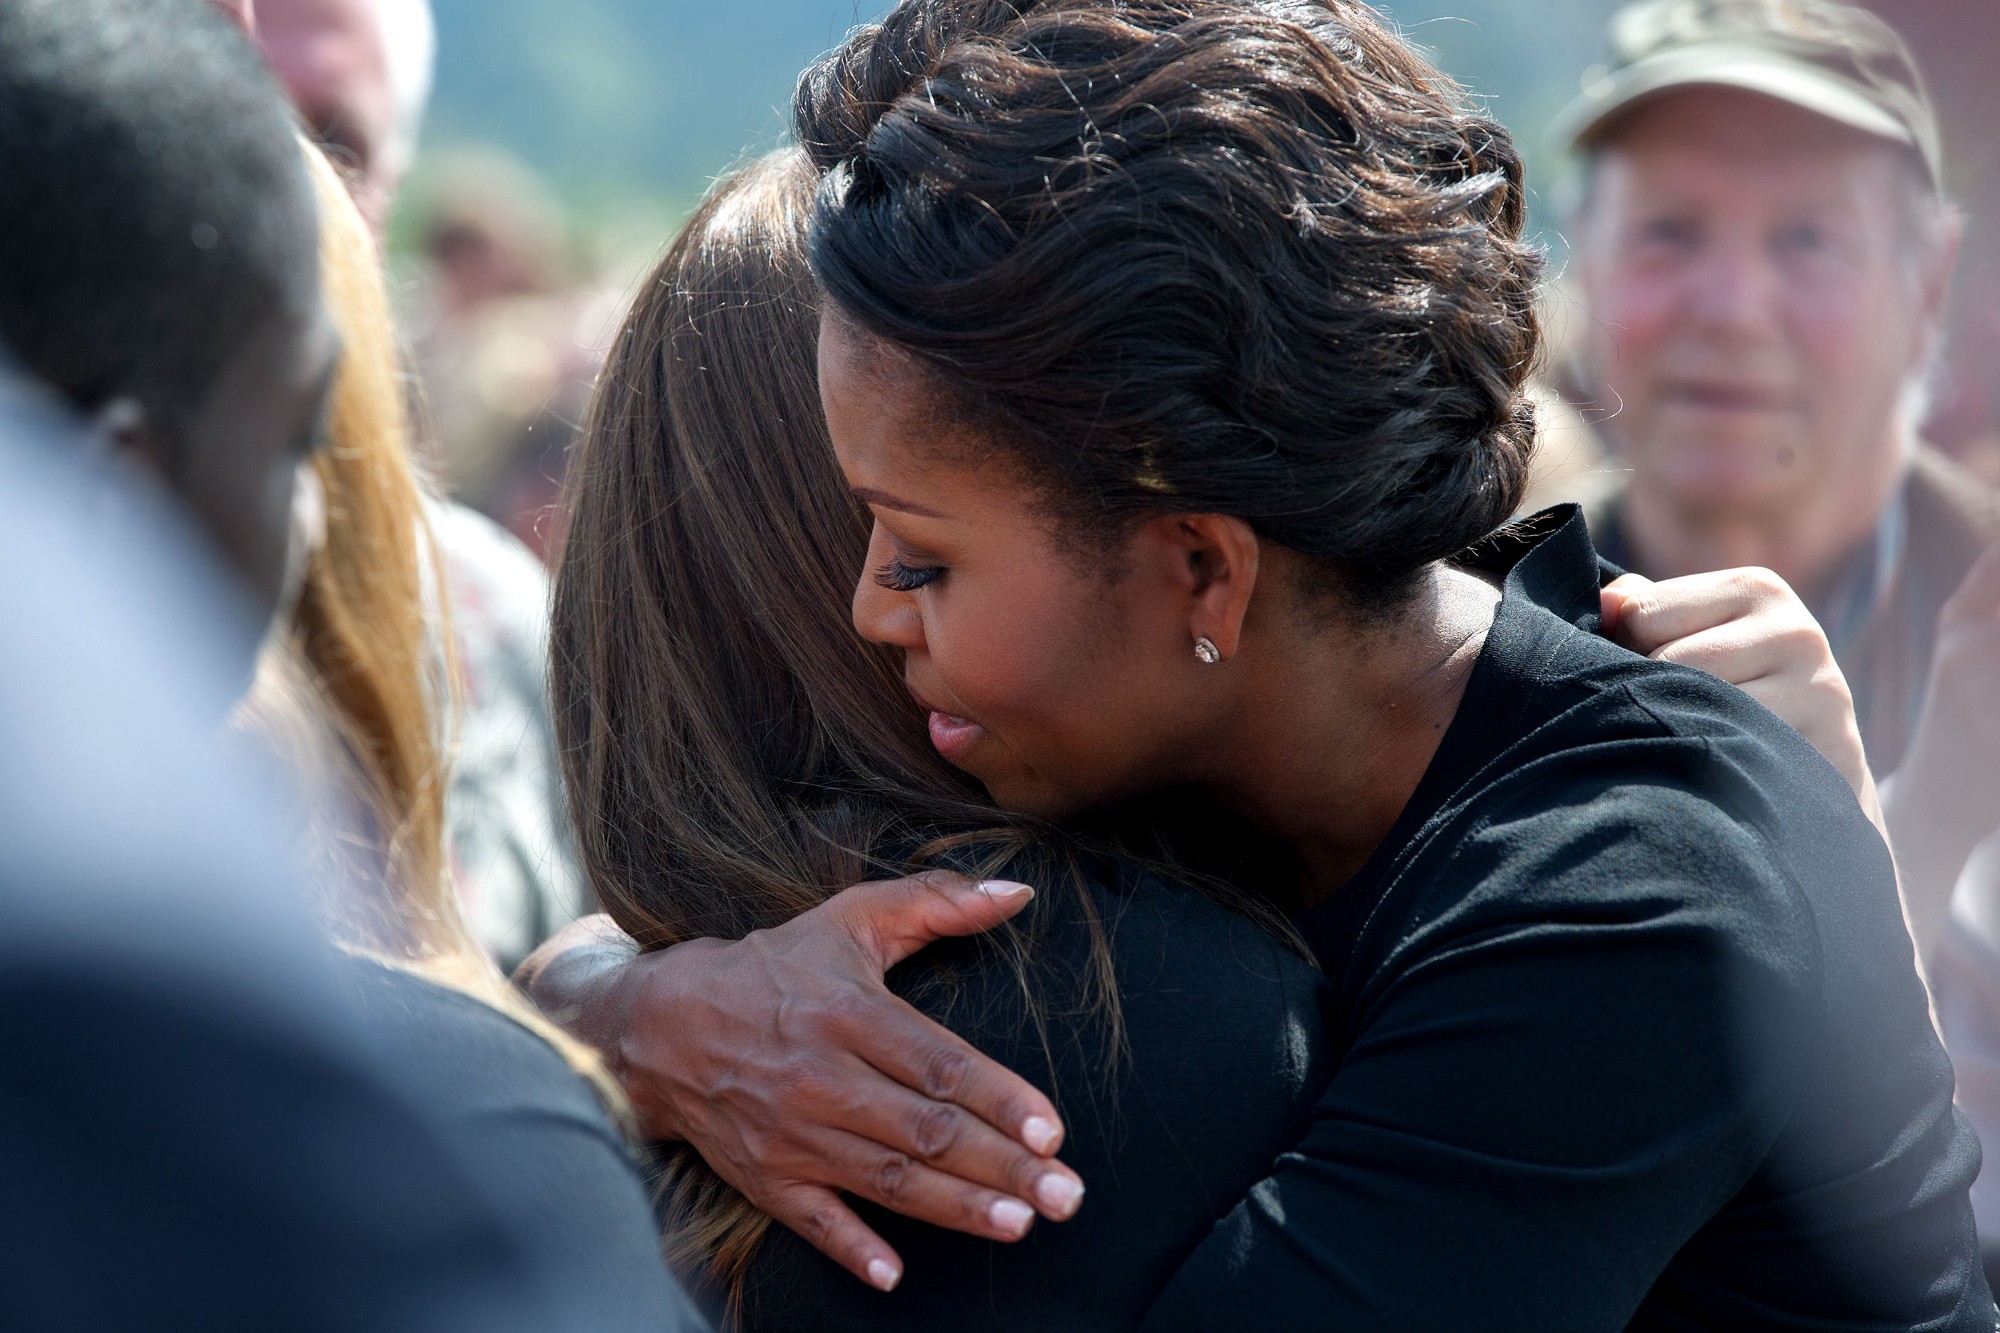 Sept. 11, 2011. Consoling family members of those who lost their lives on 9/11, at the Flight 93 National Memorial in Shanksville, Pa. (Official White House Photo by Pete Souza)